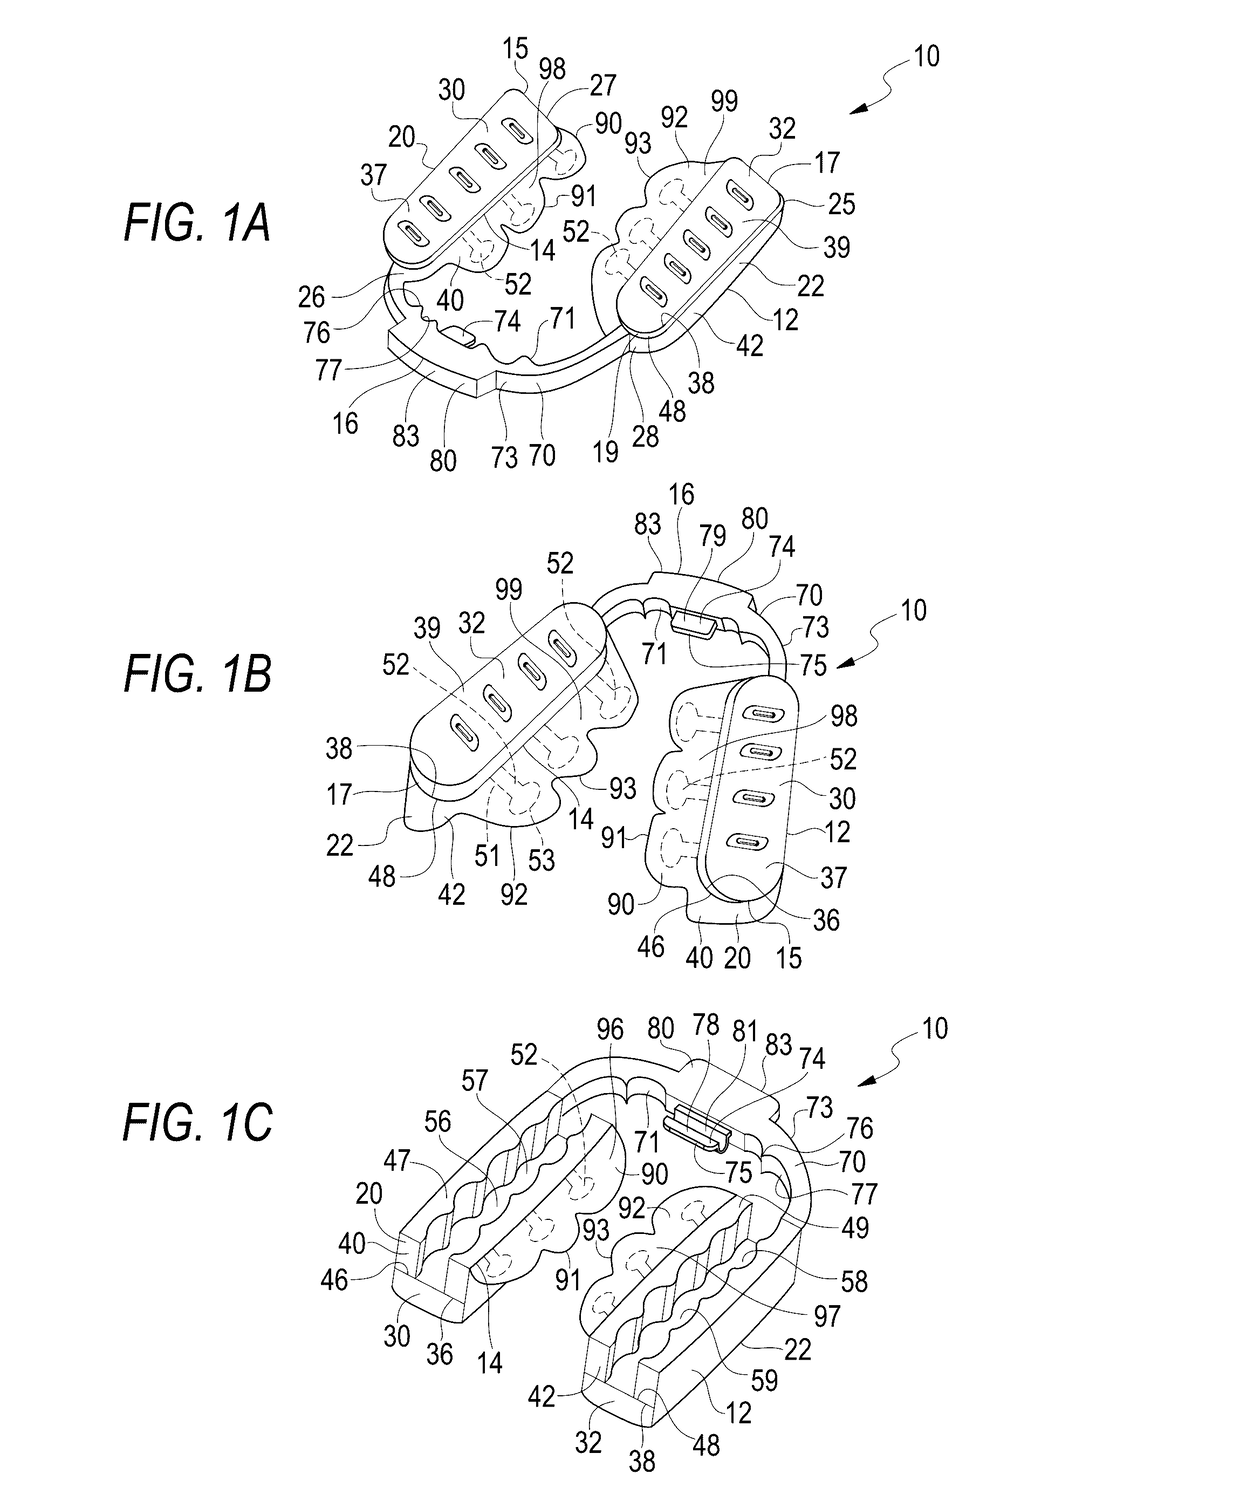 Dental appliance apparatus and respiratory performance